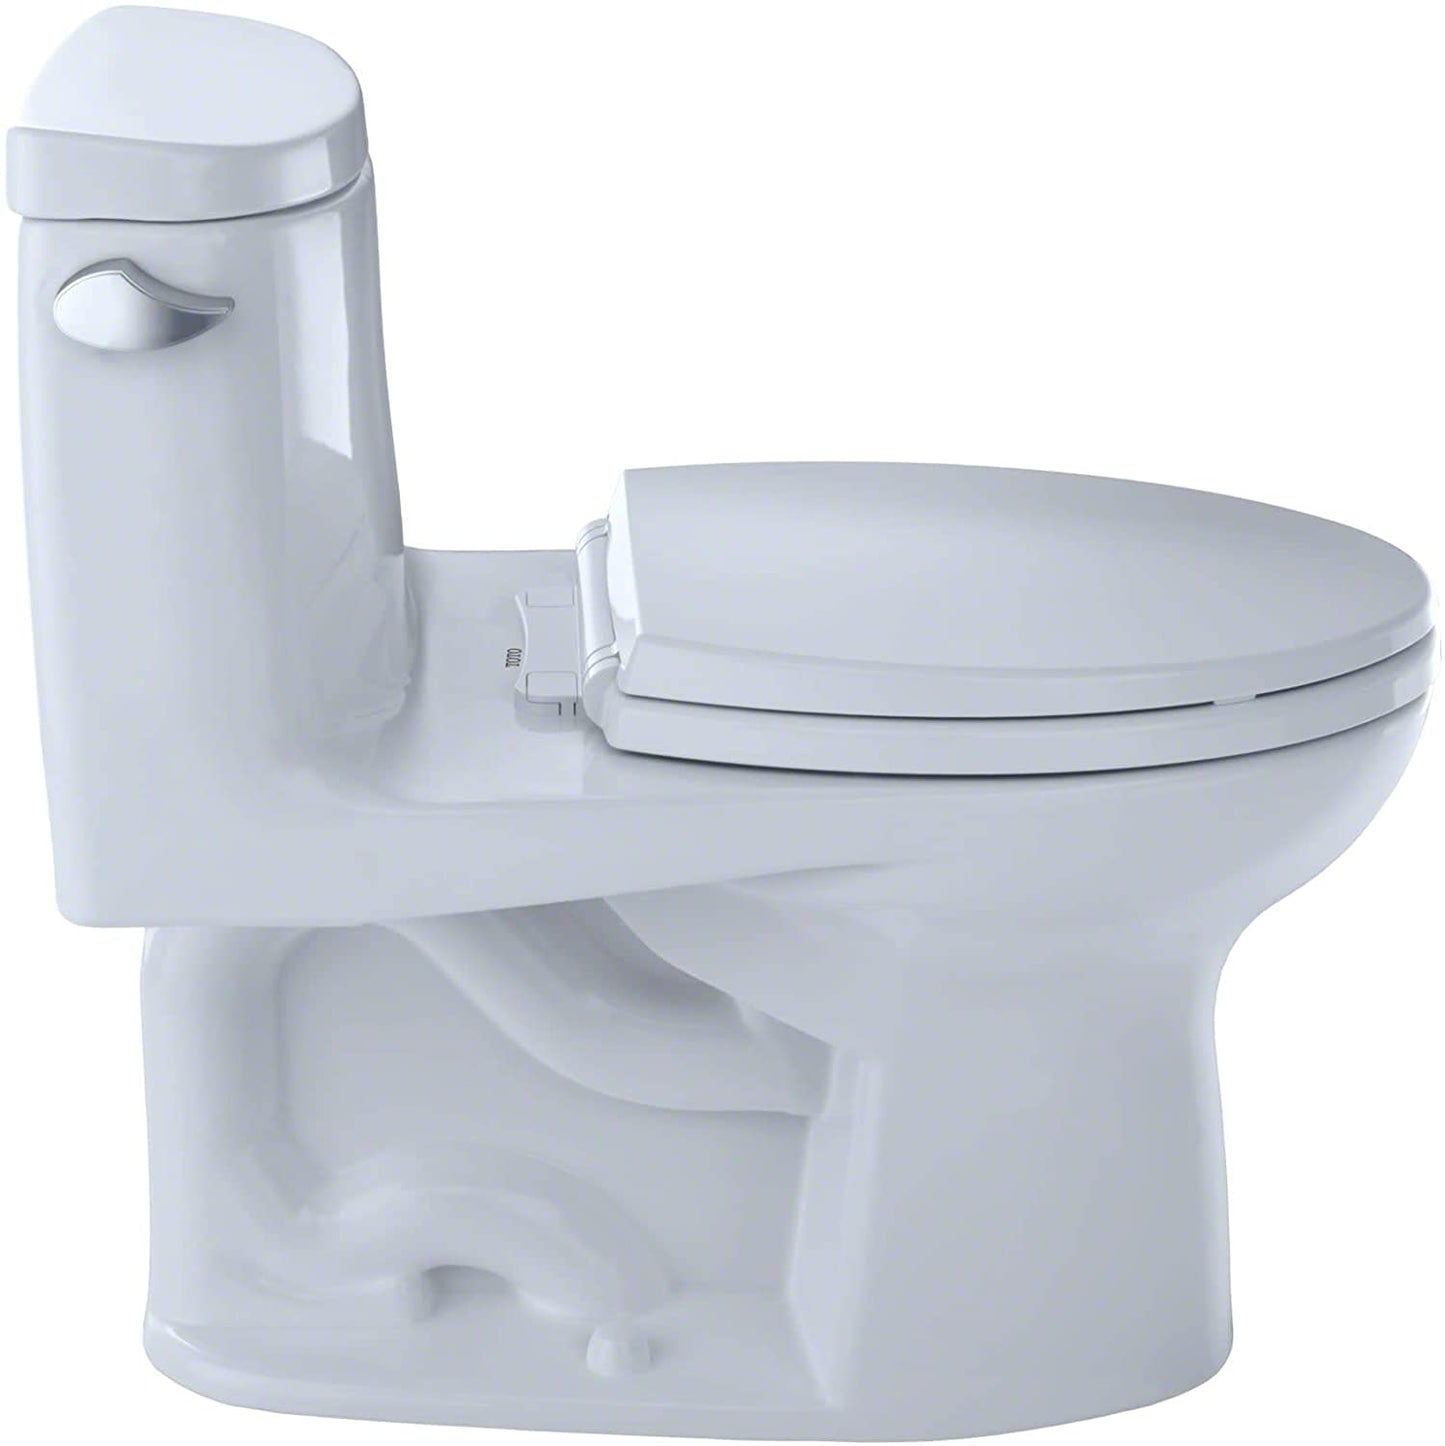 Toto MS604114CEFG#01 - Ultramax II One Piece Elongated 1.28 GPF Toilet with Tornado Flush System and